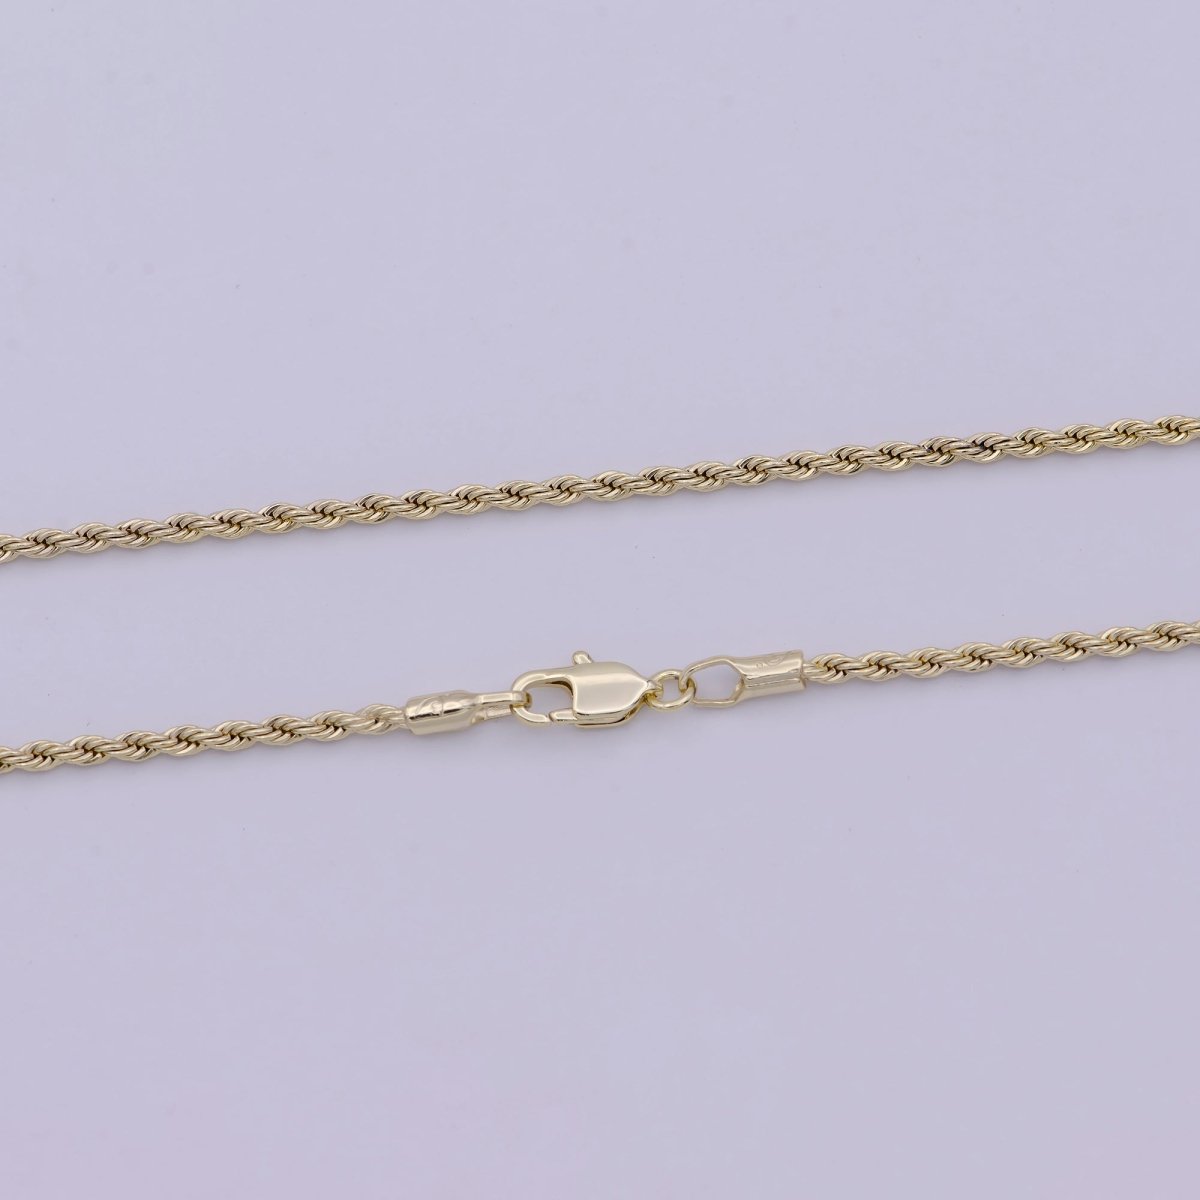 Twisted Rope Chain Necklace - 14K Gold Filled Necklace Chain - 20 Inches Rope Necklace w/ Lobster Clasps | WA-526 Clearance Pricing - DLUXCA